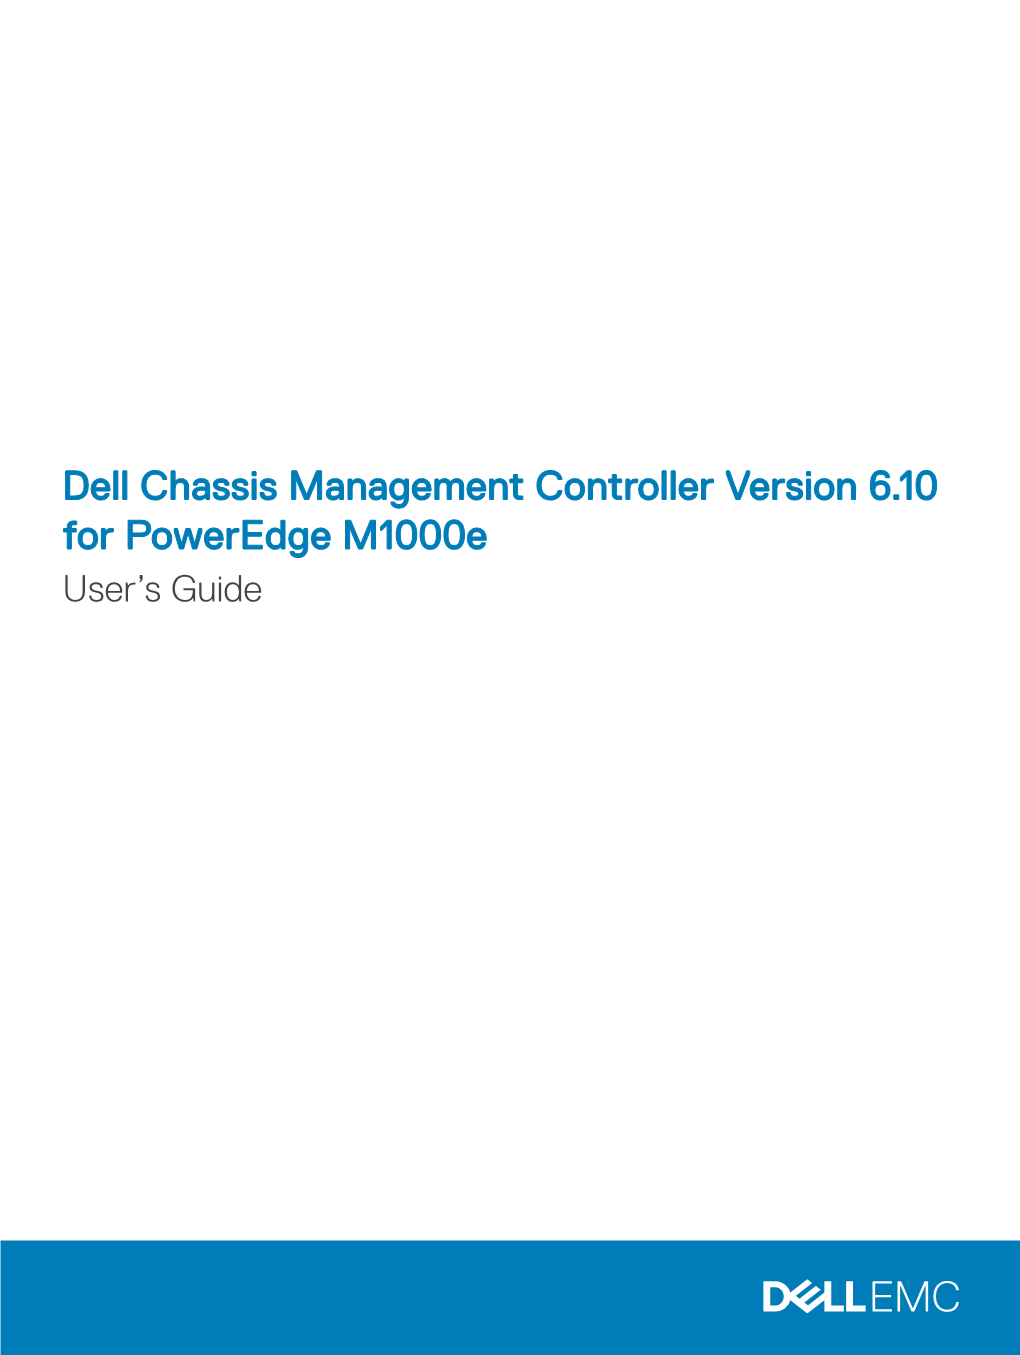 Dell Chassis Management Controller Version 6.10 for Poweredge M1000e User’S Guide Notes, Cautions, and Warnings